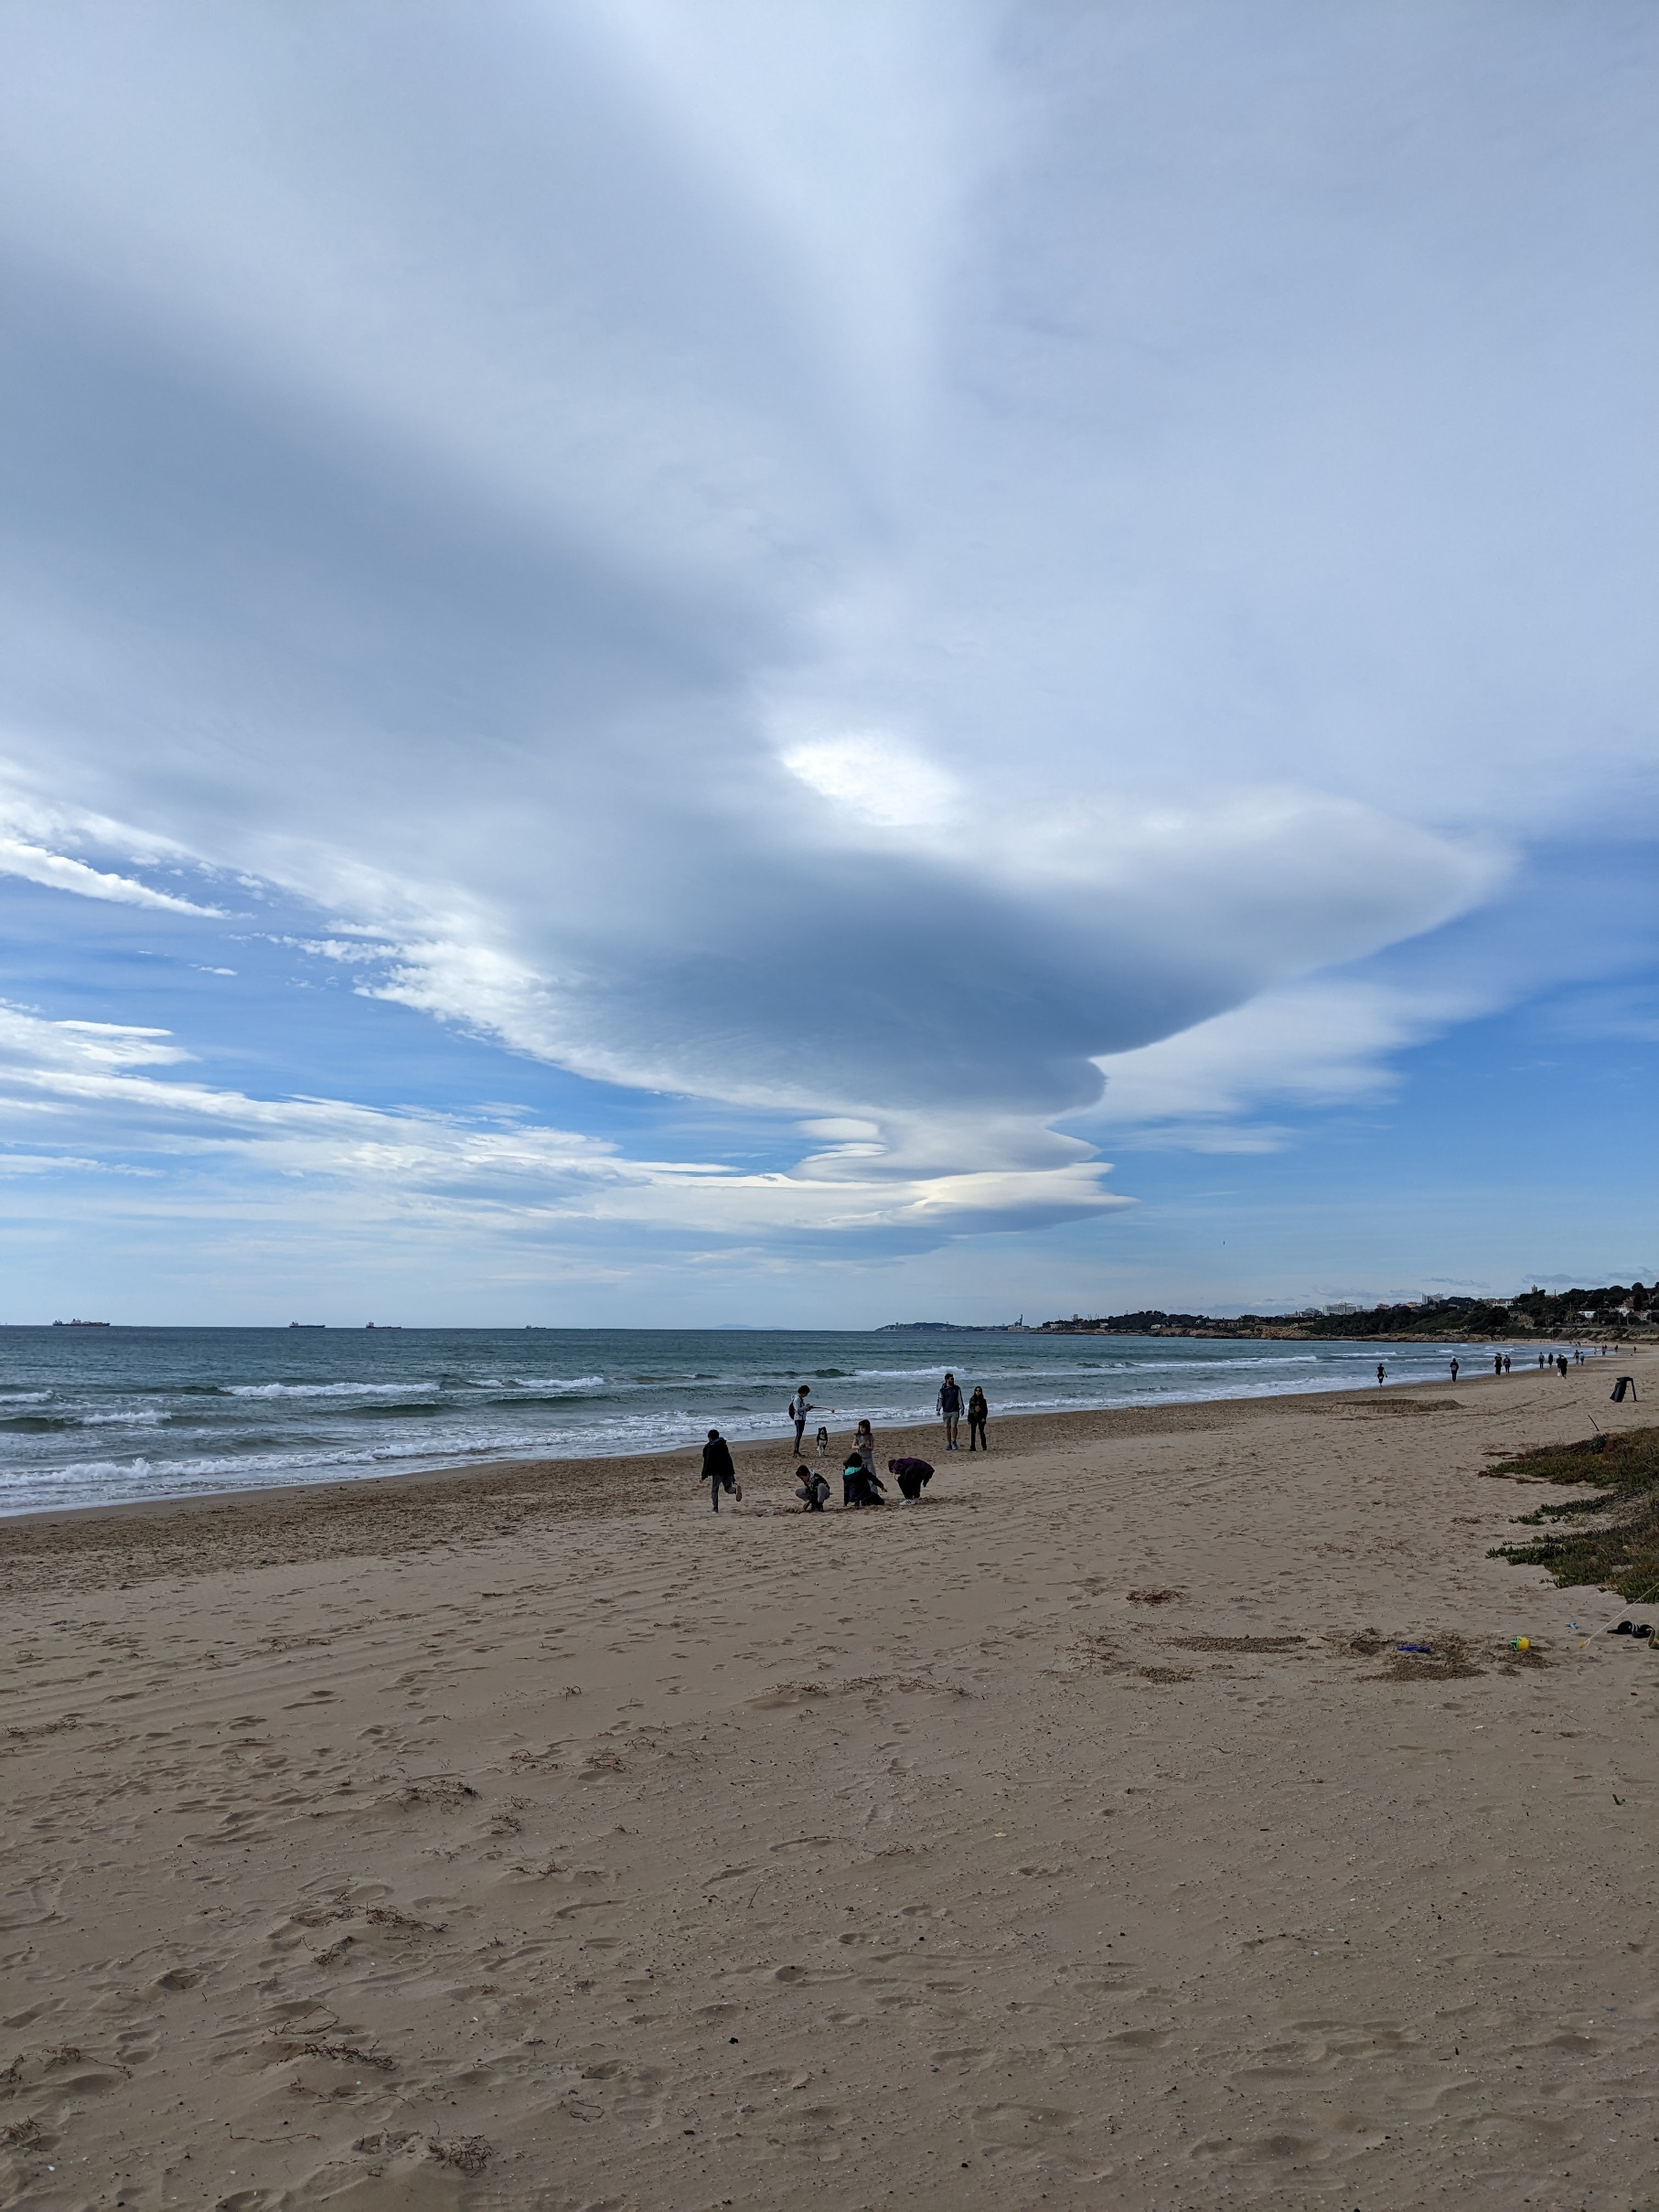 Some really nice clouds over the beach